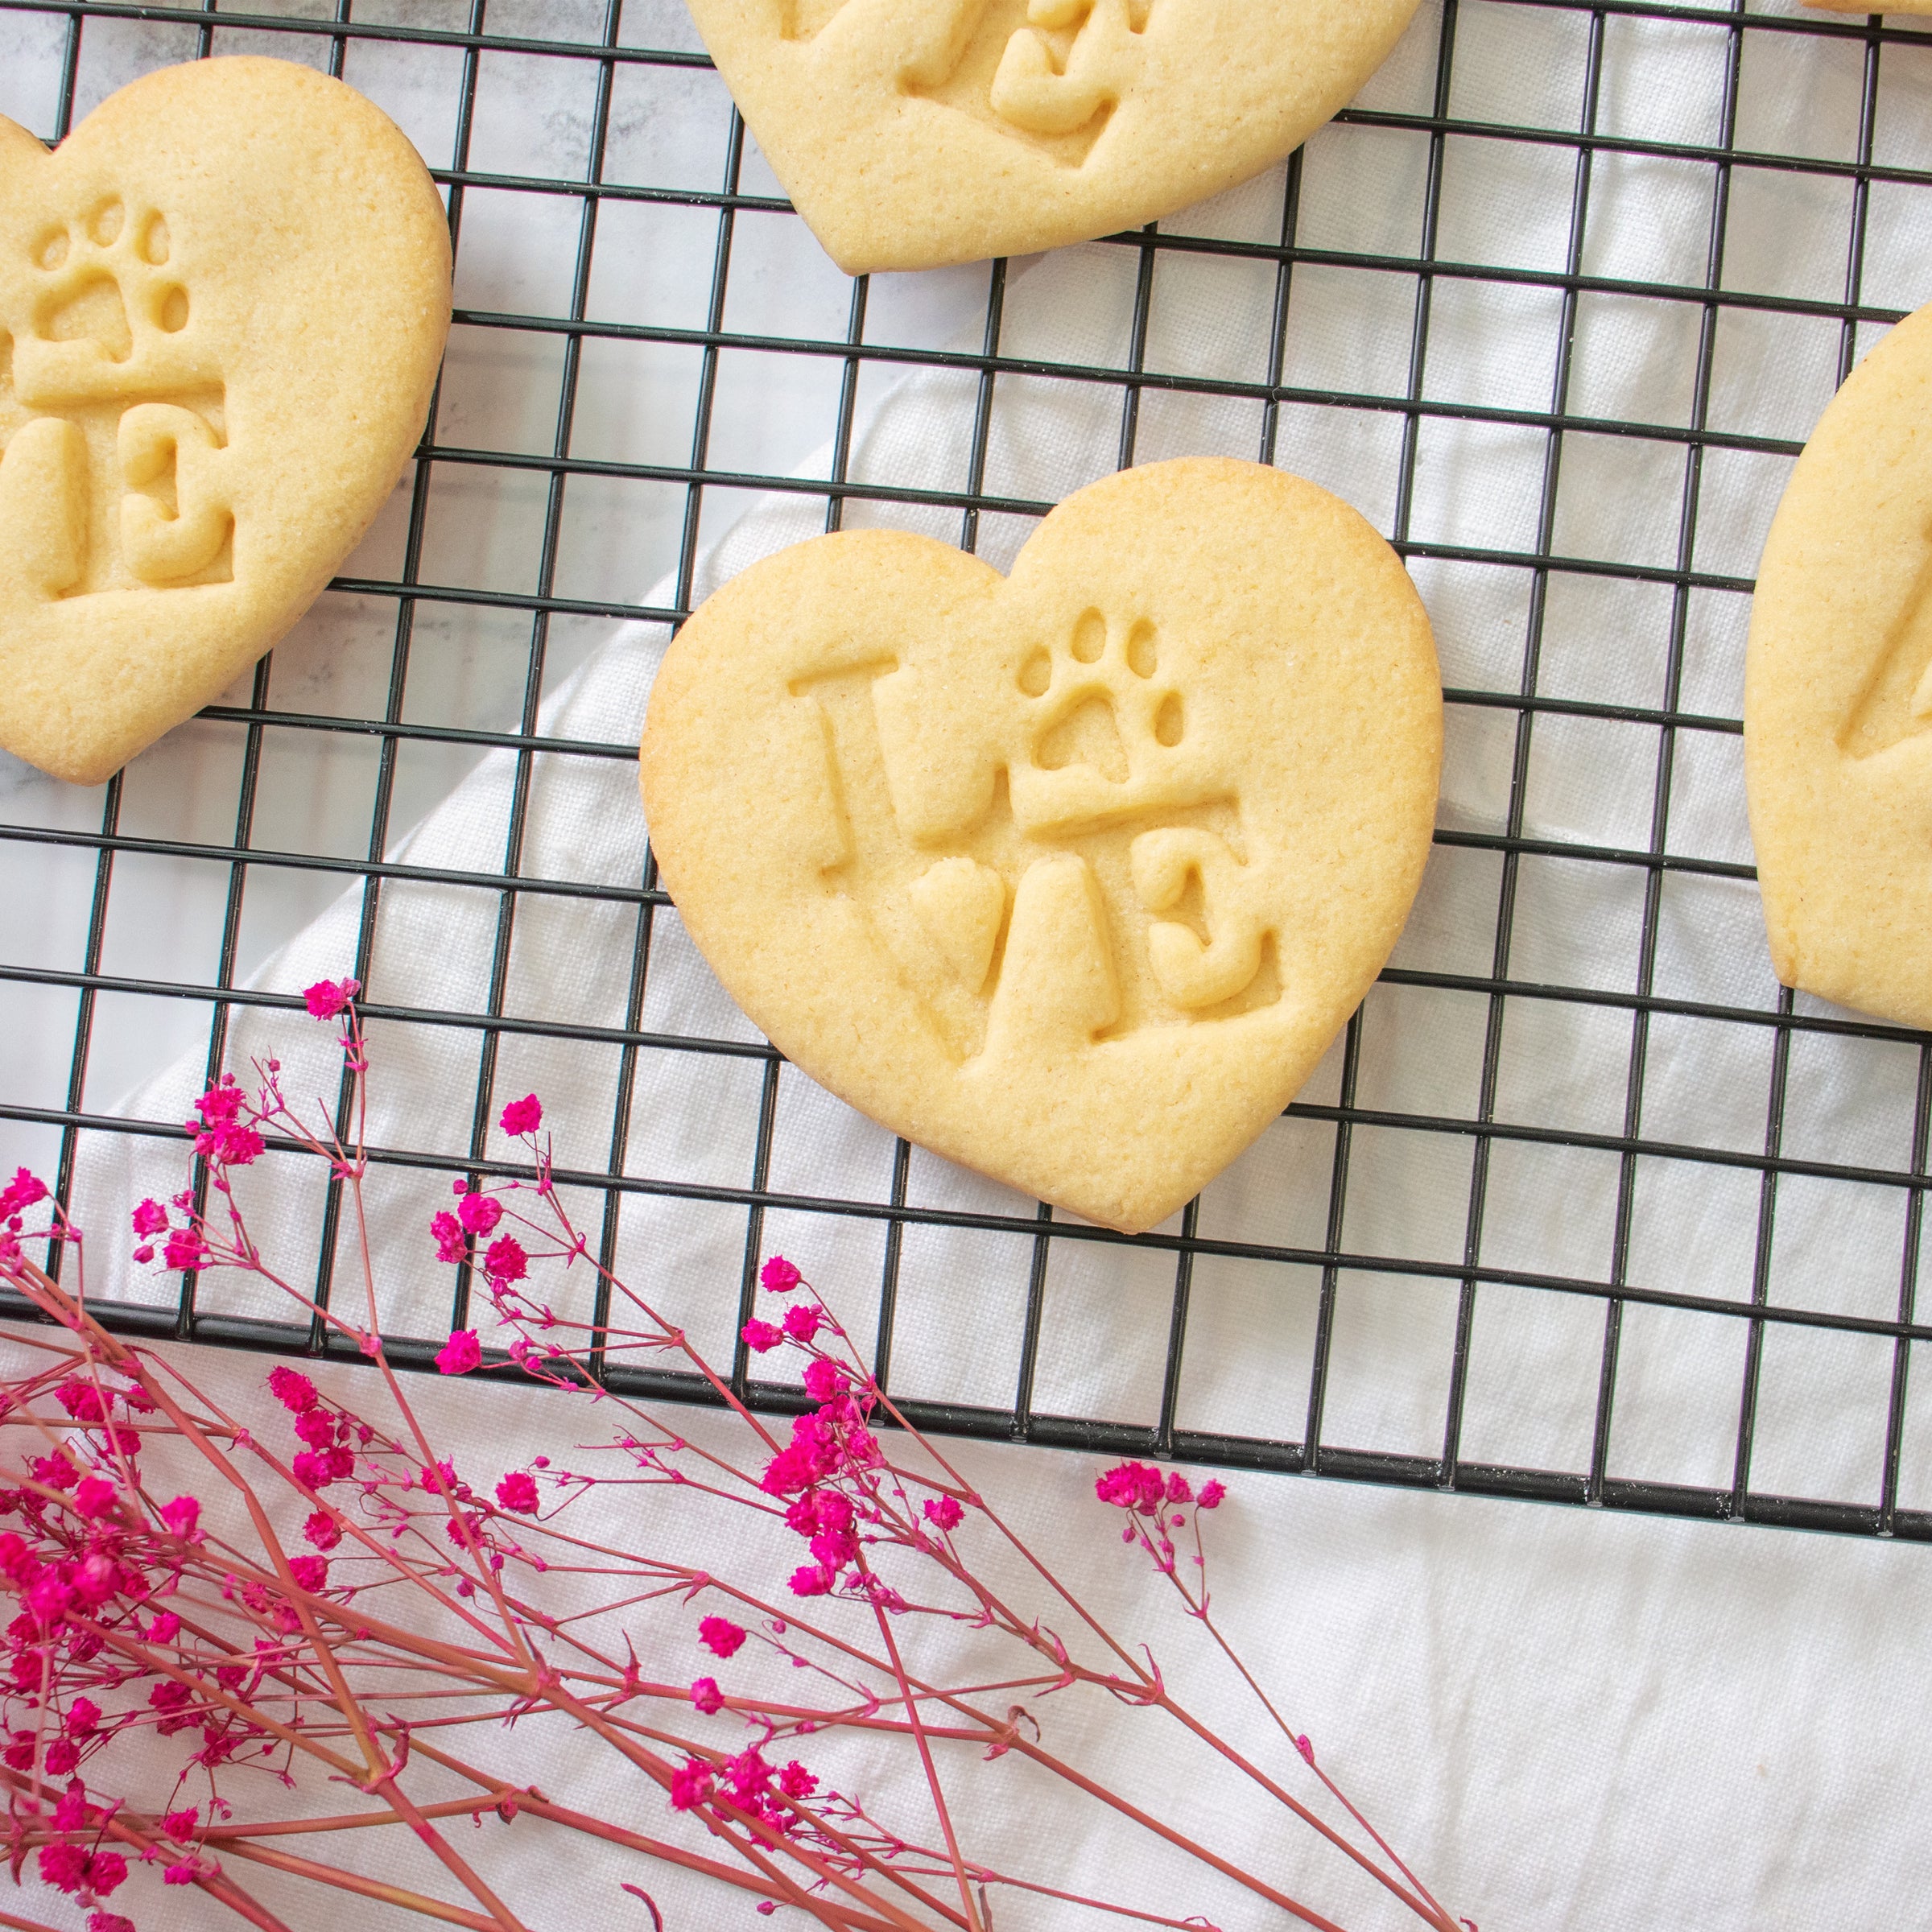 Philly LOVE with Paw Print Cookies (Heart)